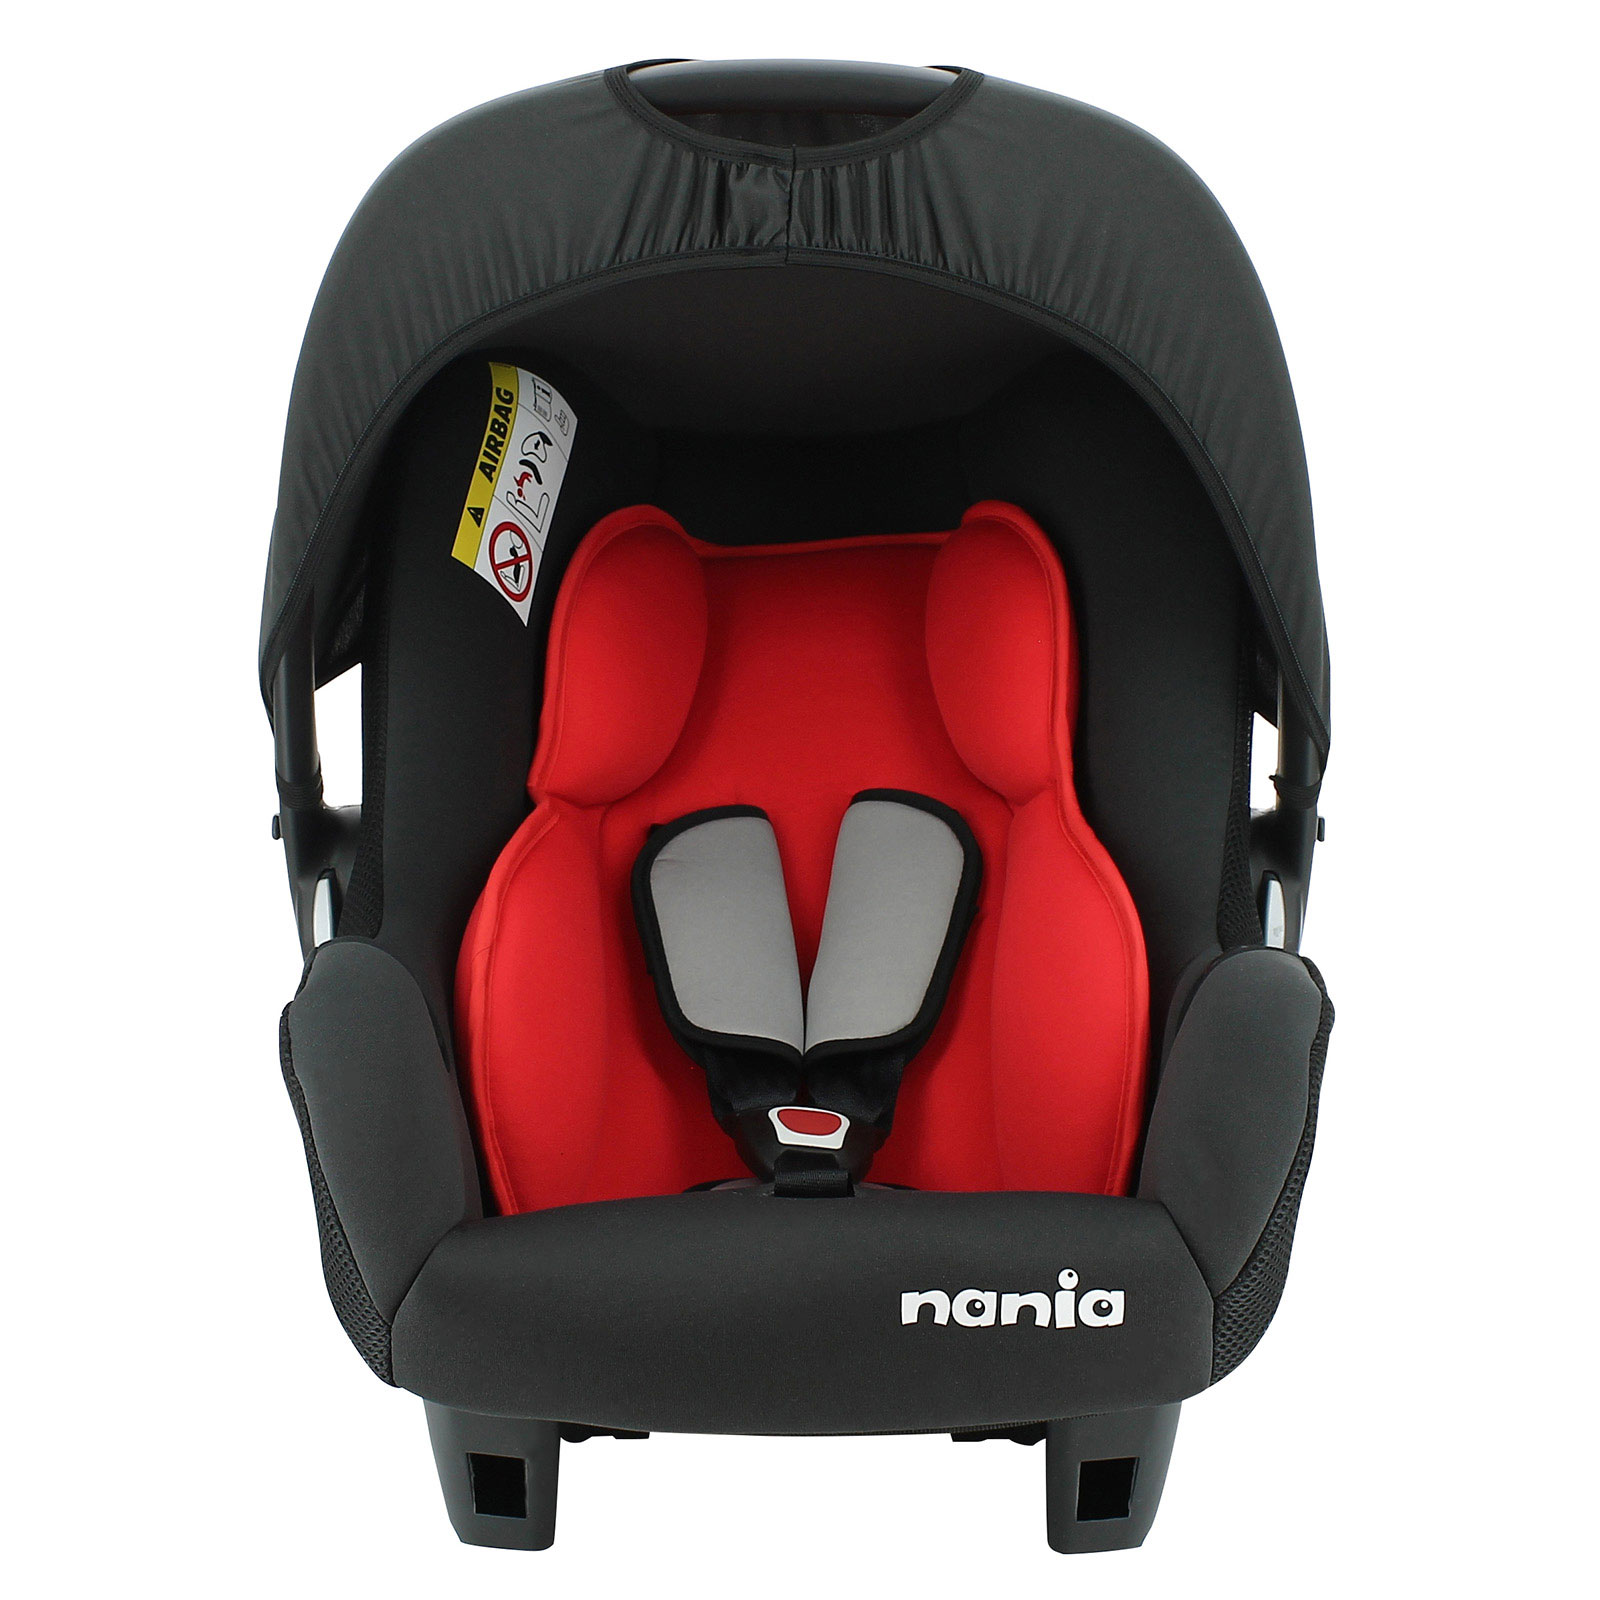 Nania Beone SP Access Red Group 0+ Infant Carrier Car Seat - Black/Red (0-15 Months)